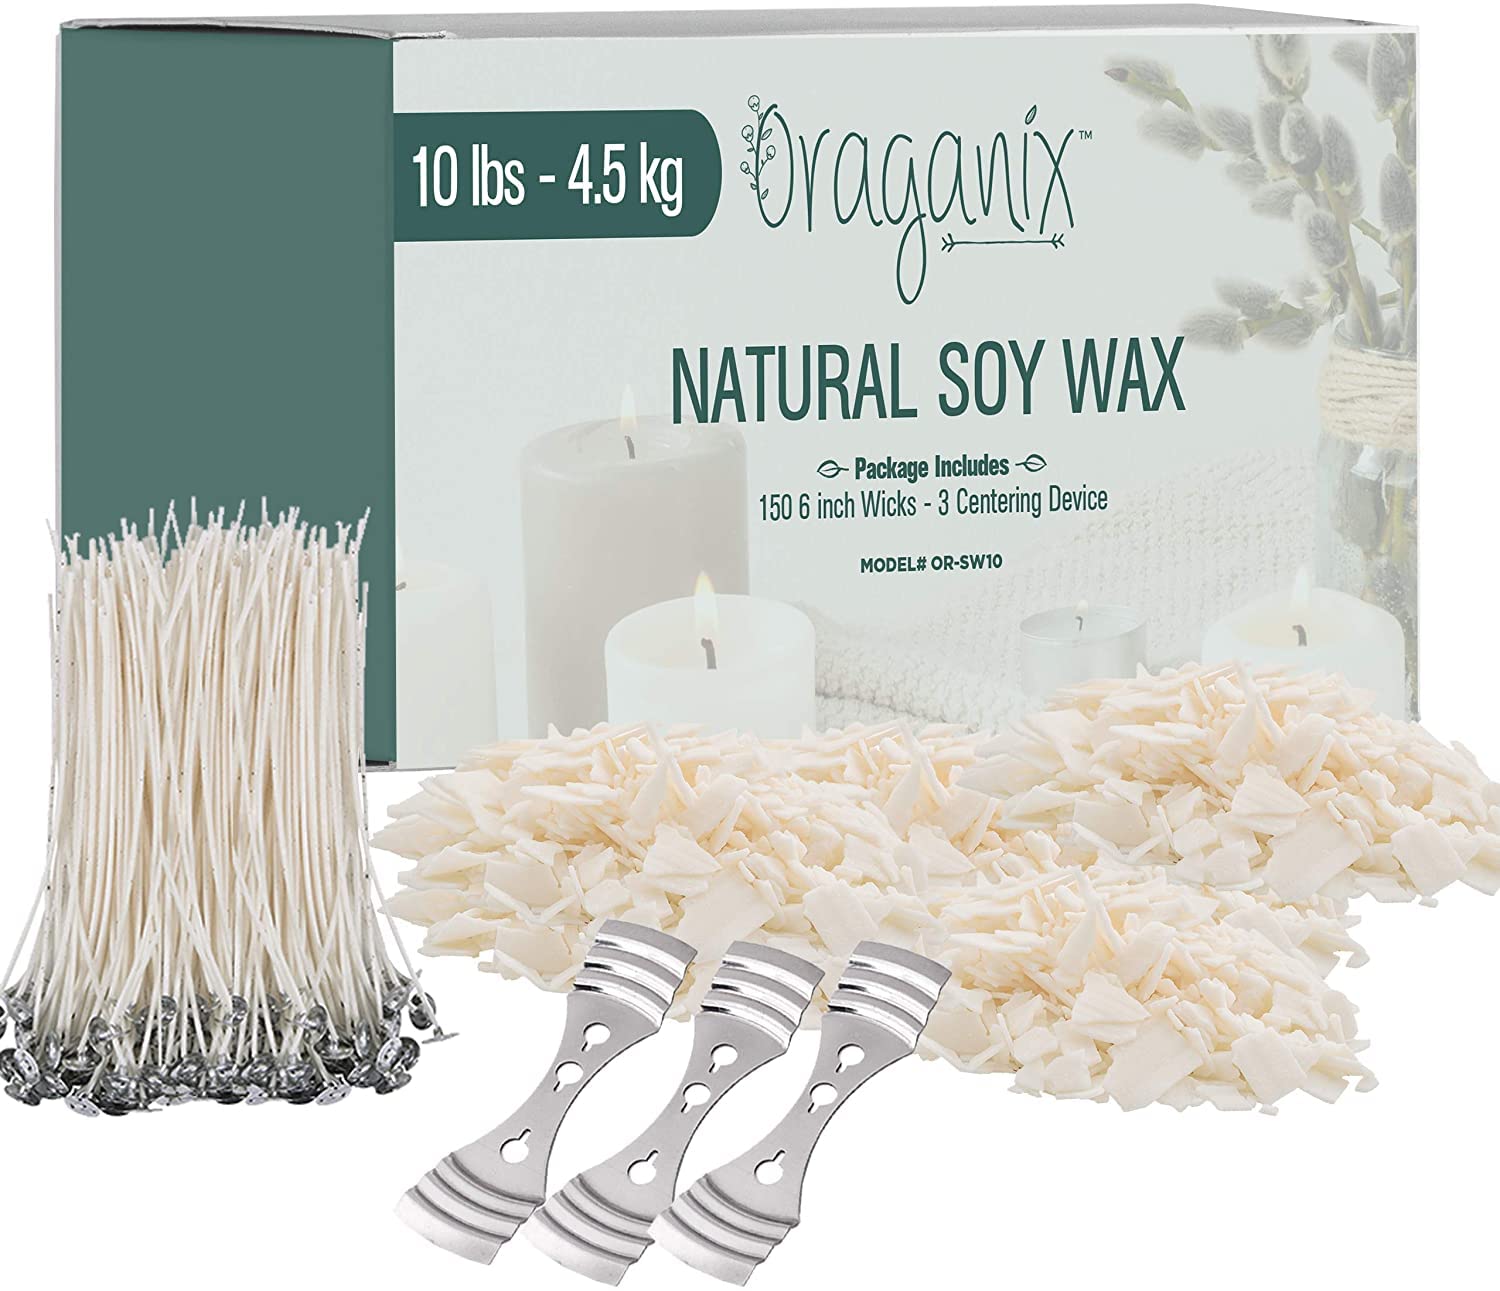 Oraganix DIY Candle Making Kit and Candle Making Supplies - Soy Wax for Candle Making - 10lbs Soy Candle Wax - 150 6-Inch Pre-Waxed Candle Wicks - 3 Metal Centering Devices - Bulk Flakes Soy Wax 10 lb  - Like New